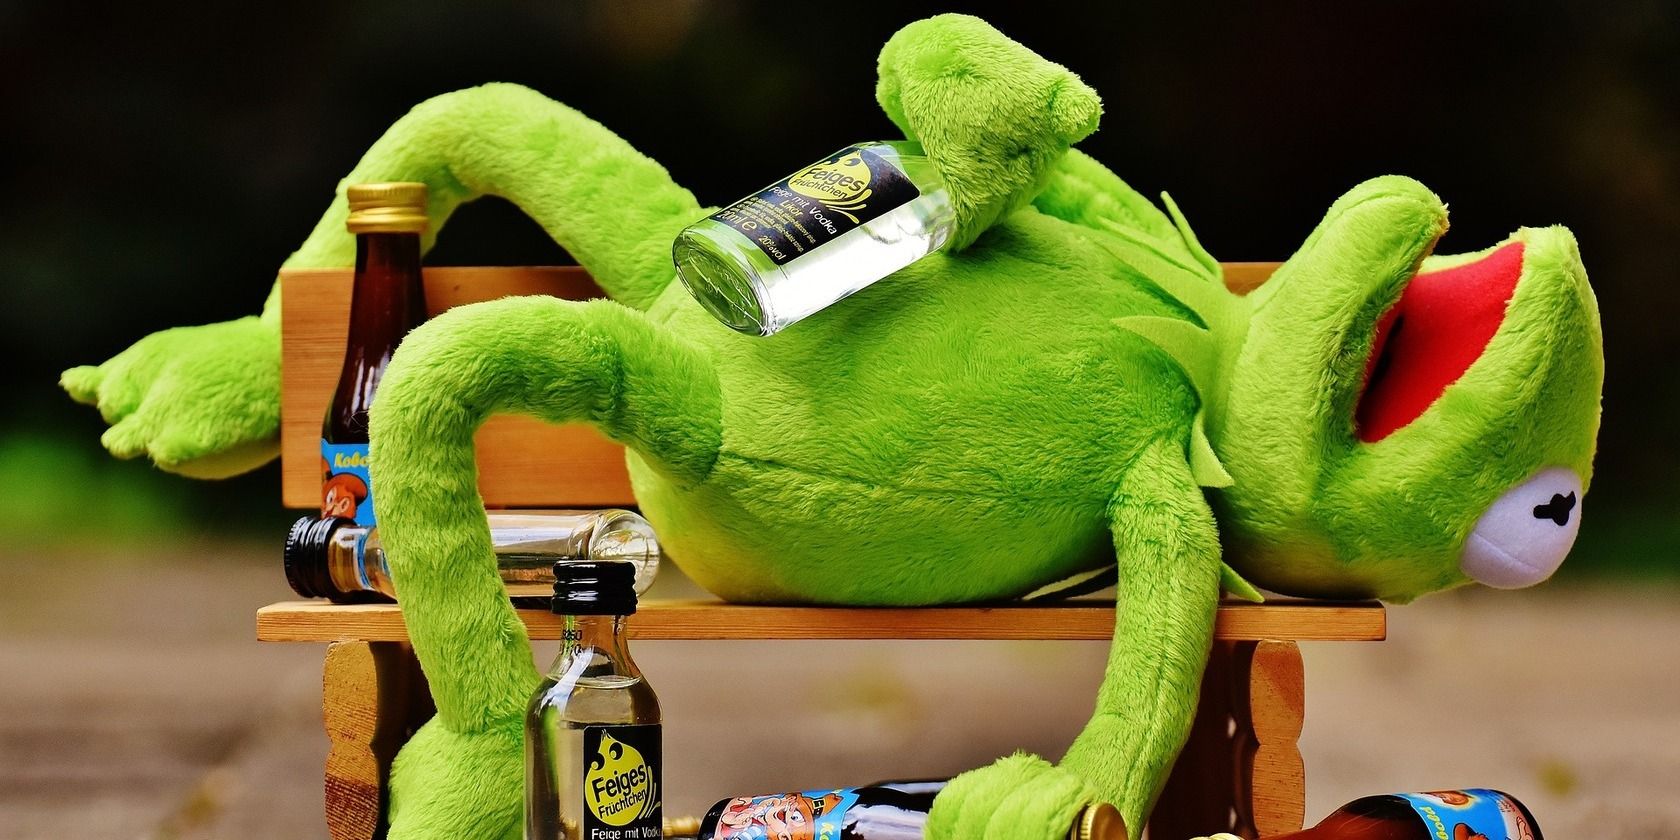 Drunken Kermit the Frog lays supine on a bench surrounded by empty bottles